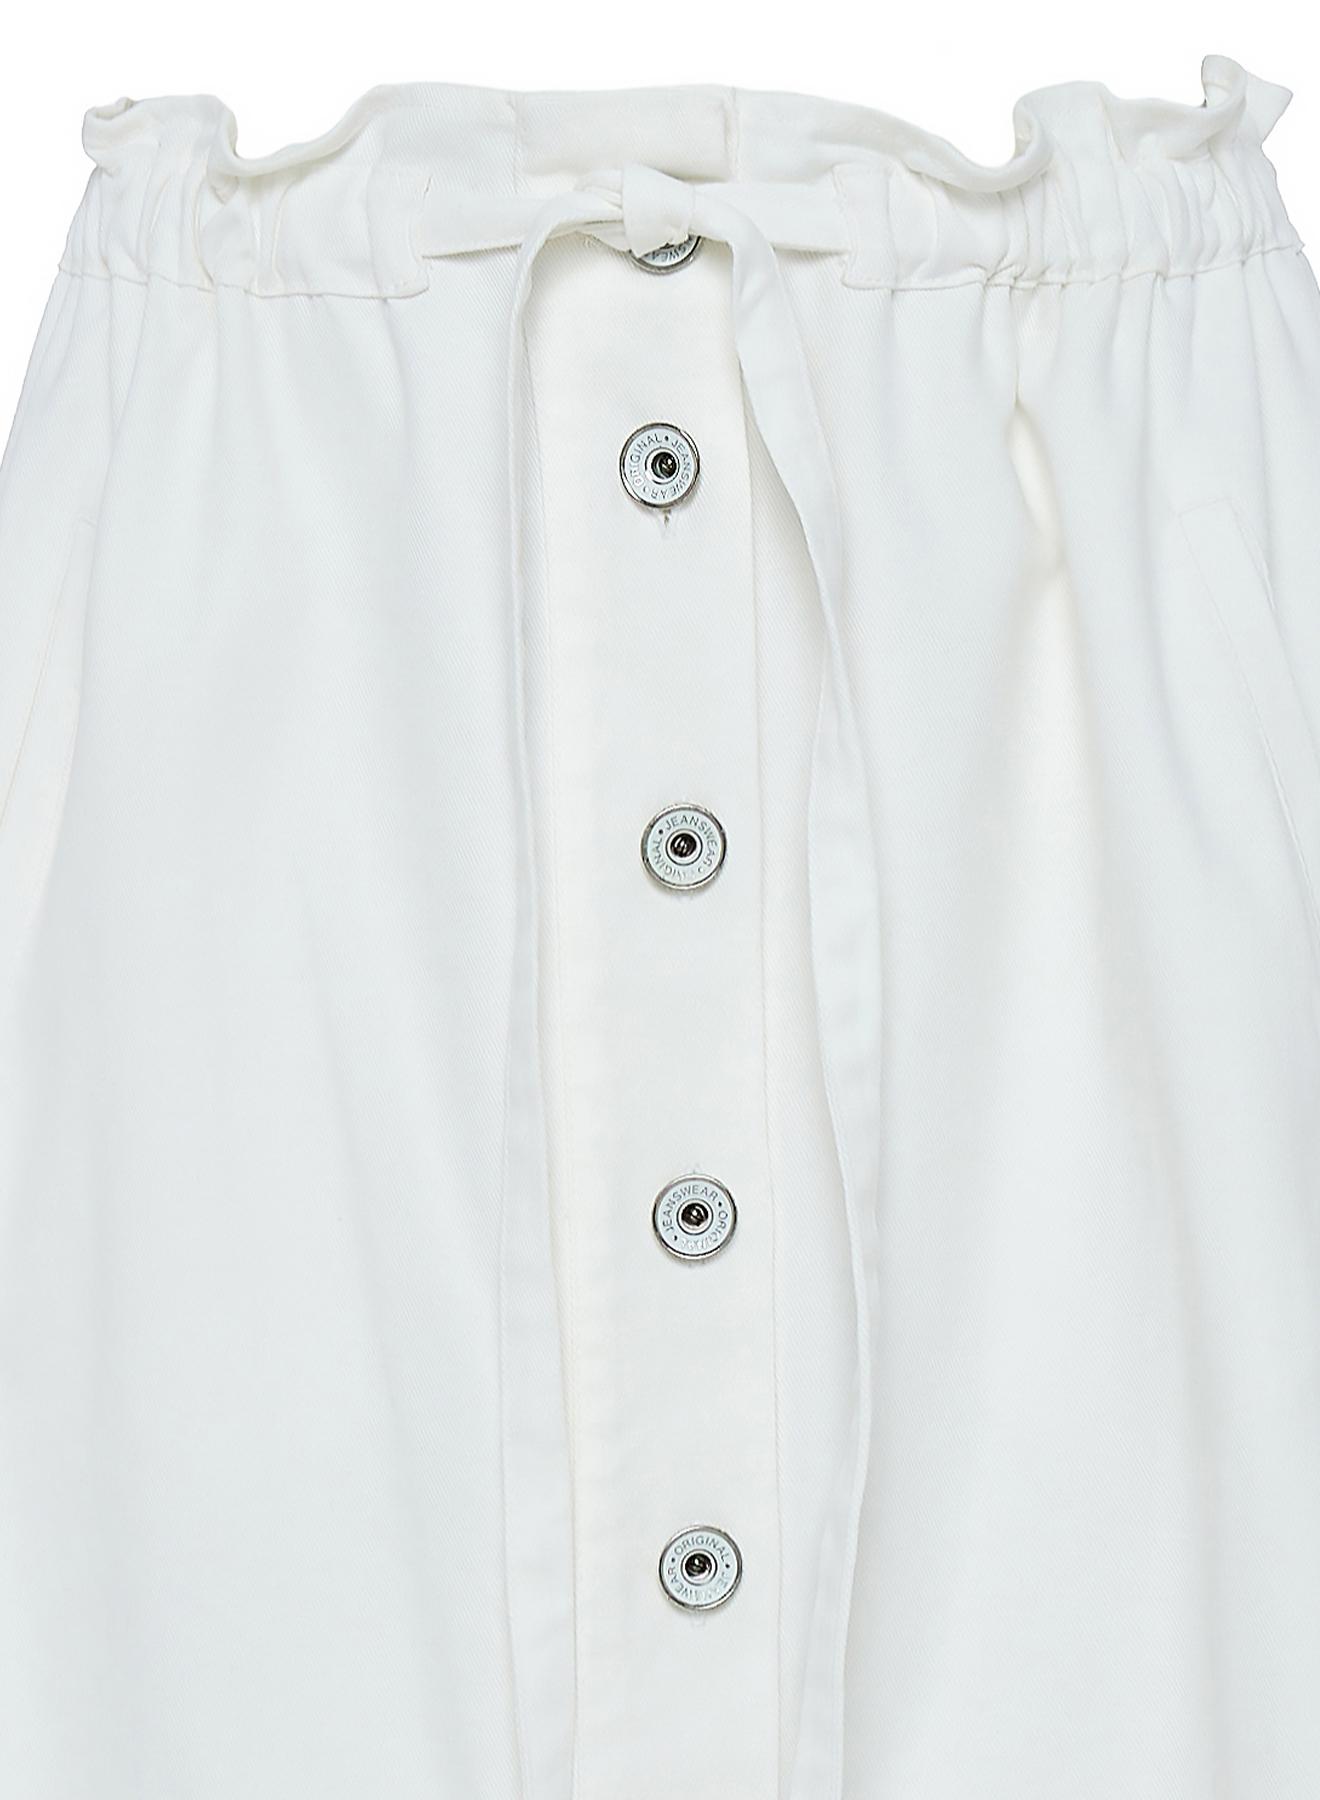 Off White denim Skirt with buttons "ELONA" Devotion Twins - 3